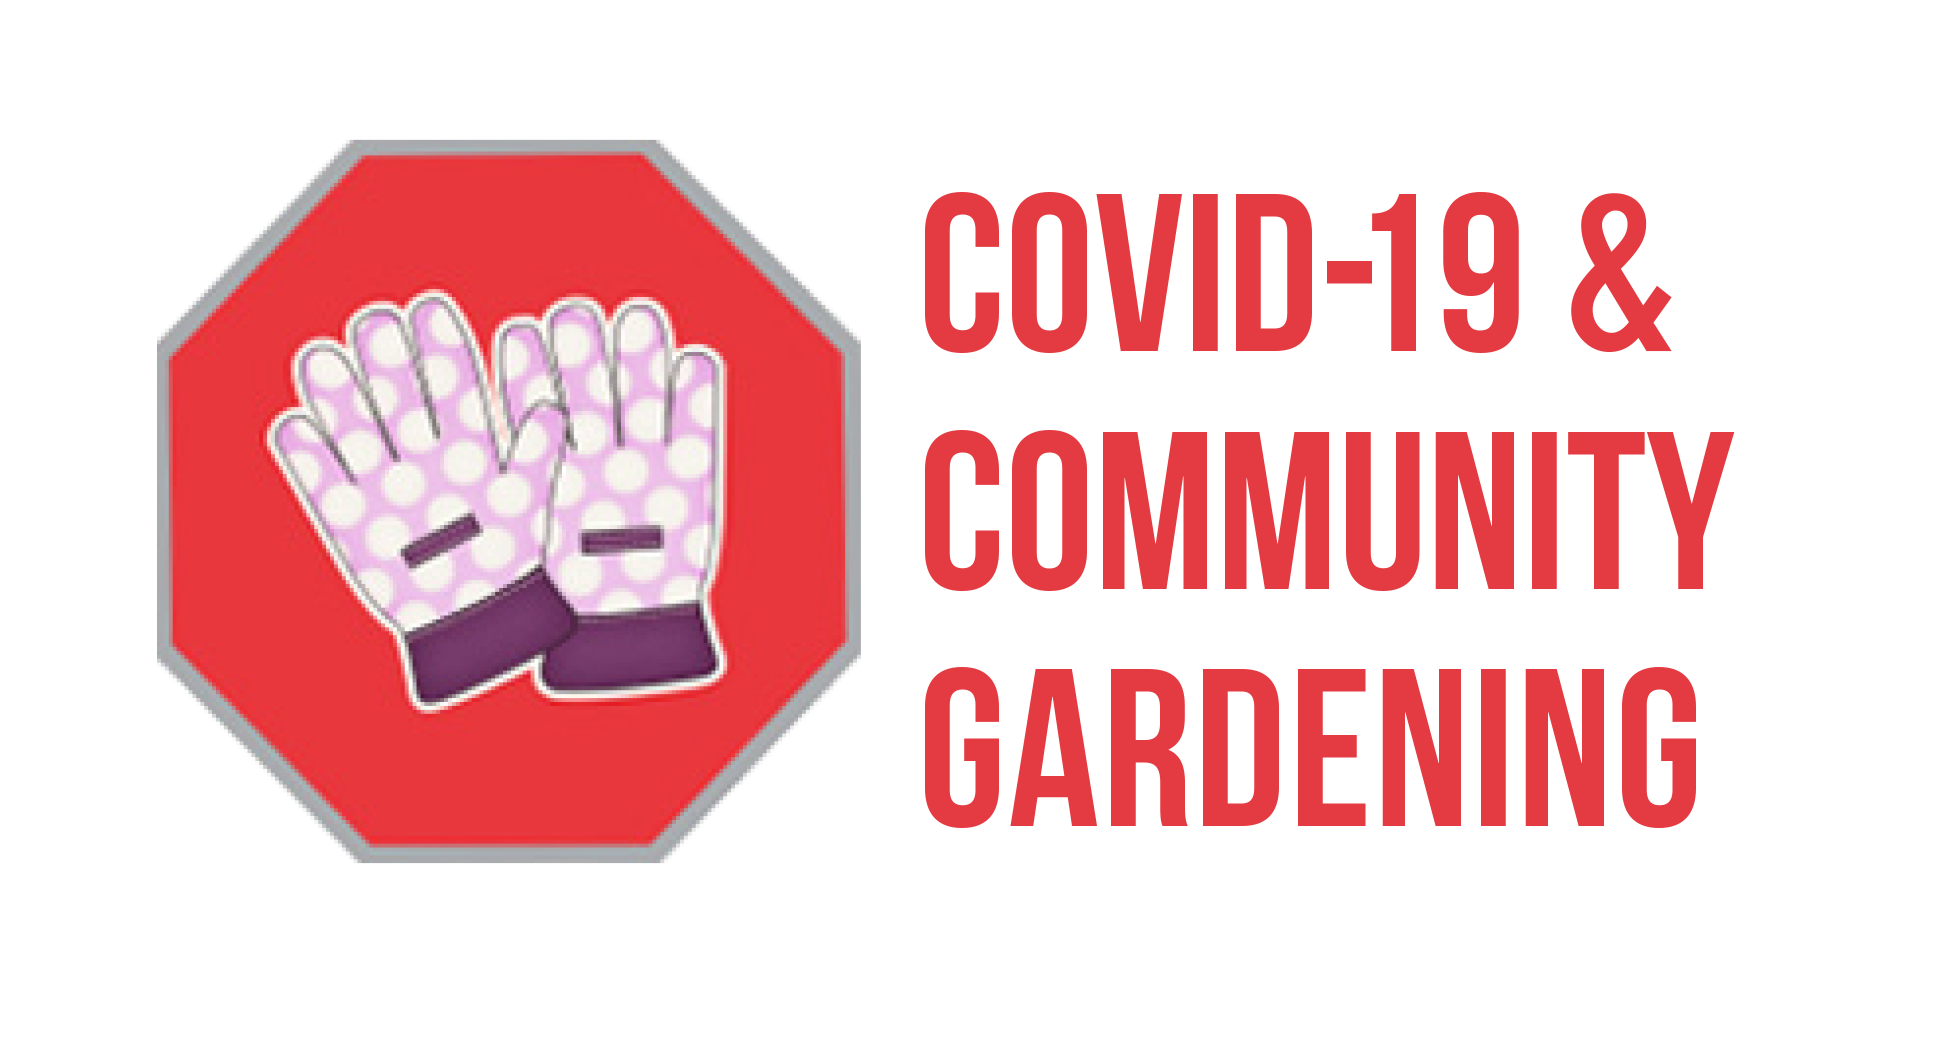 Guidelines for Chicago’s Community Gardeners Amidst COVID-19